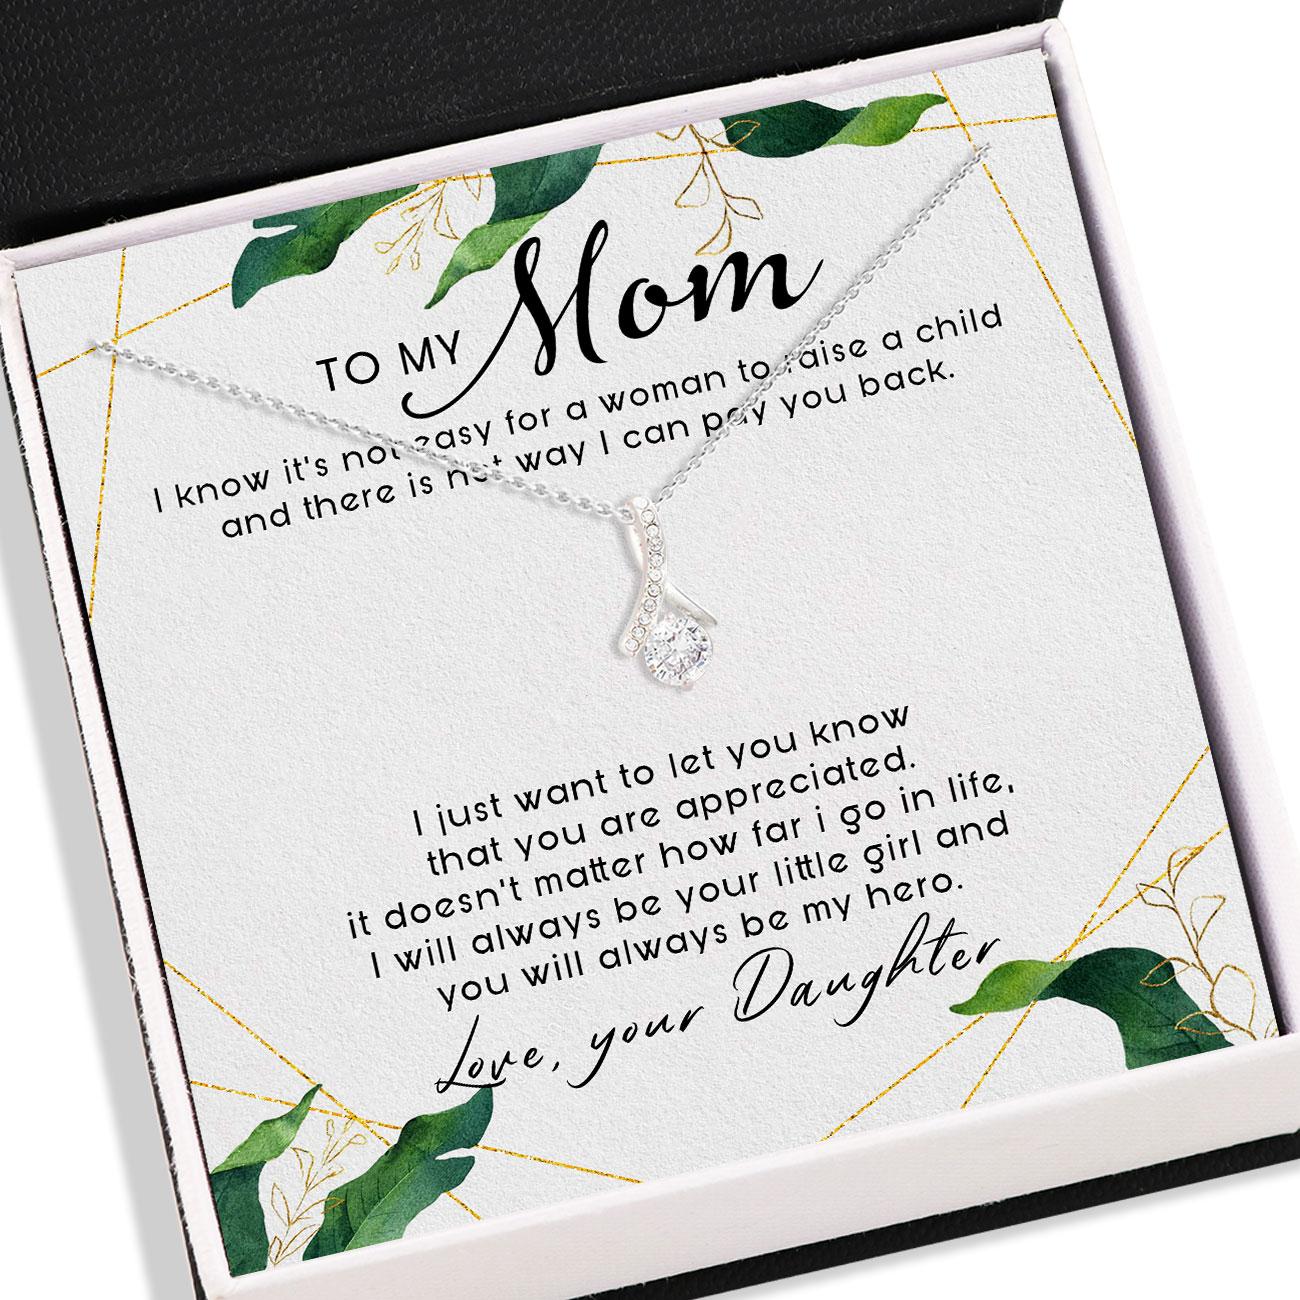 Mom Necklace, To Mom From Daughter Necklace Card Message - Alluring Beauty Necklace, Jewelry For Mom, Mother Gifts